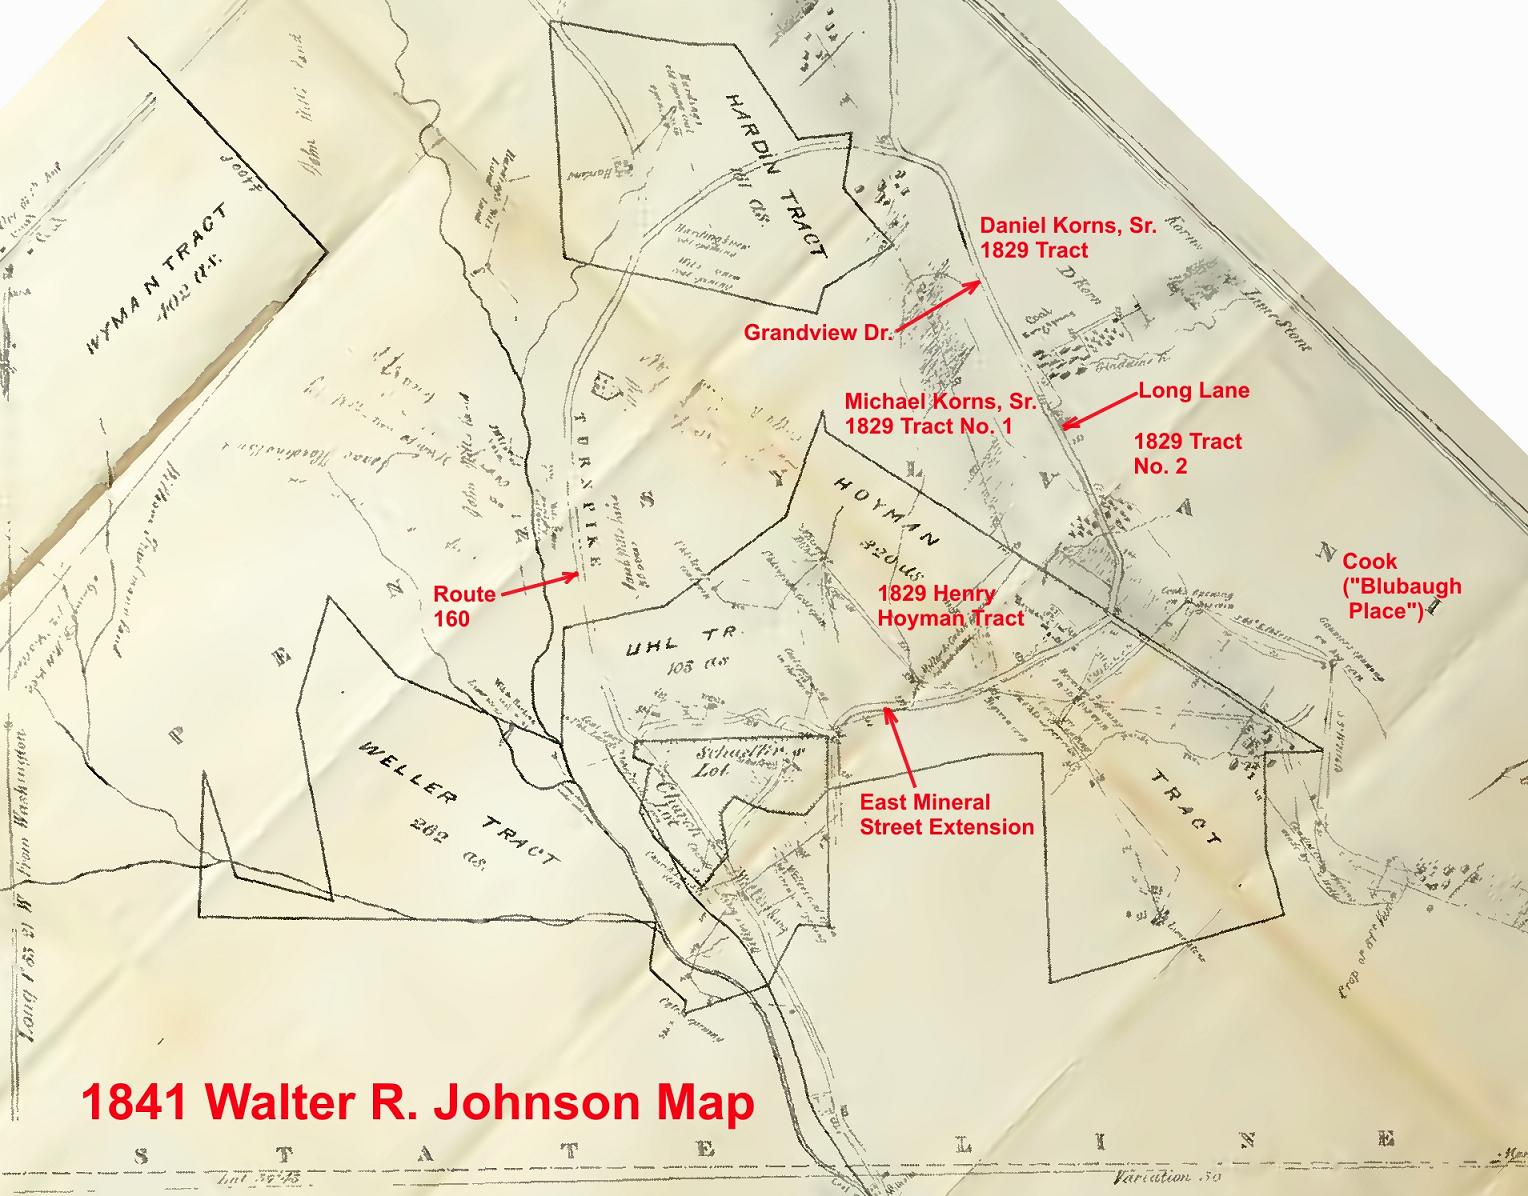 Annotated 1841 Johnson map